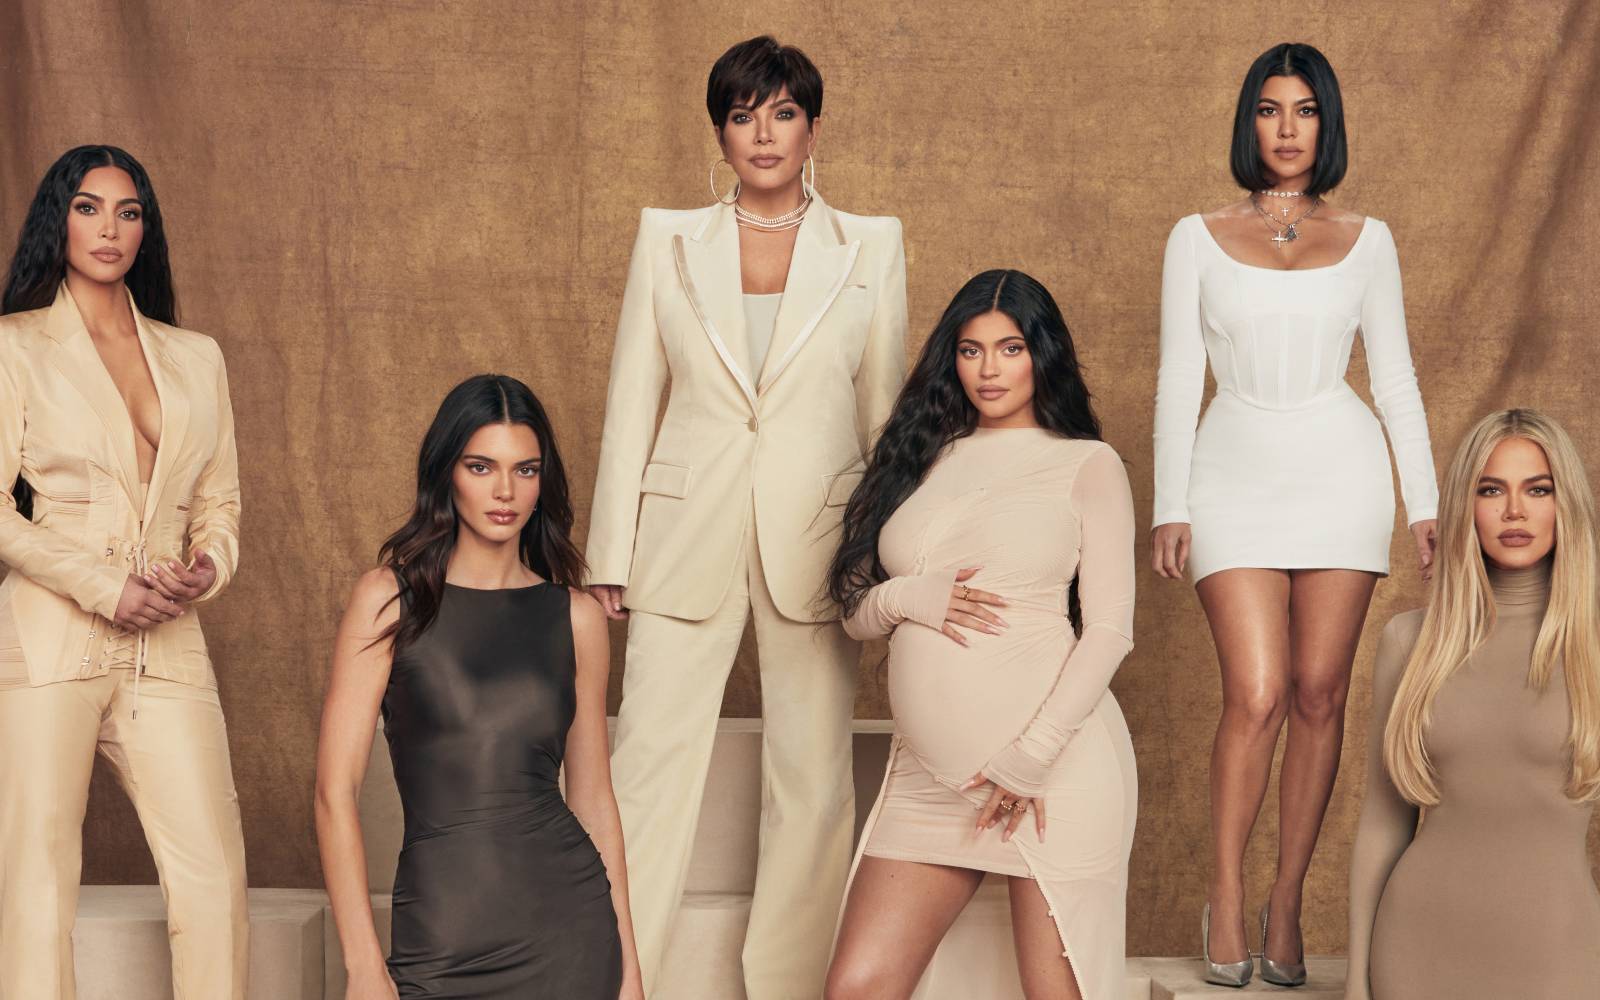 Will the new season of The Kardashians be about vulnerability?